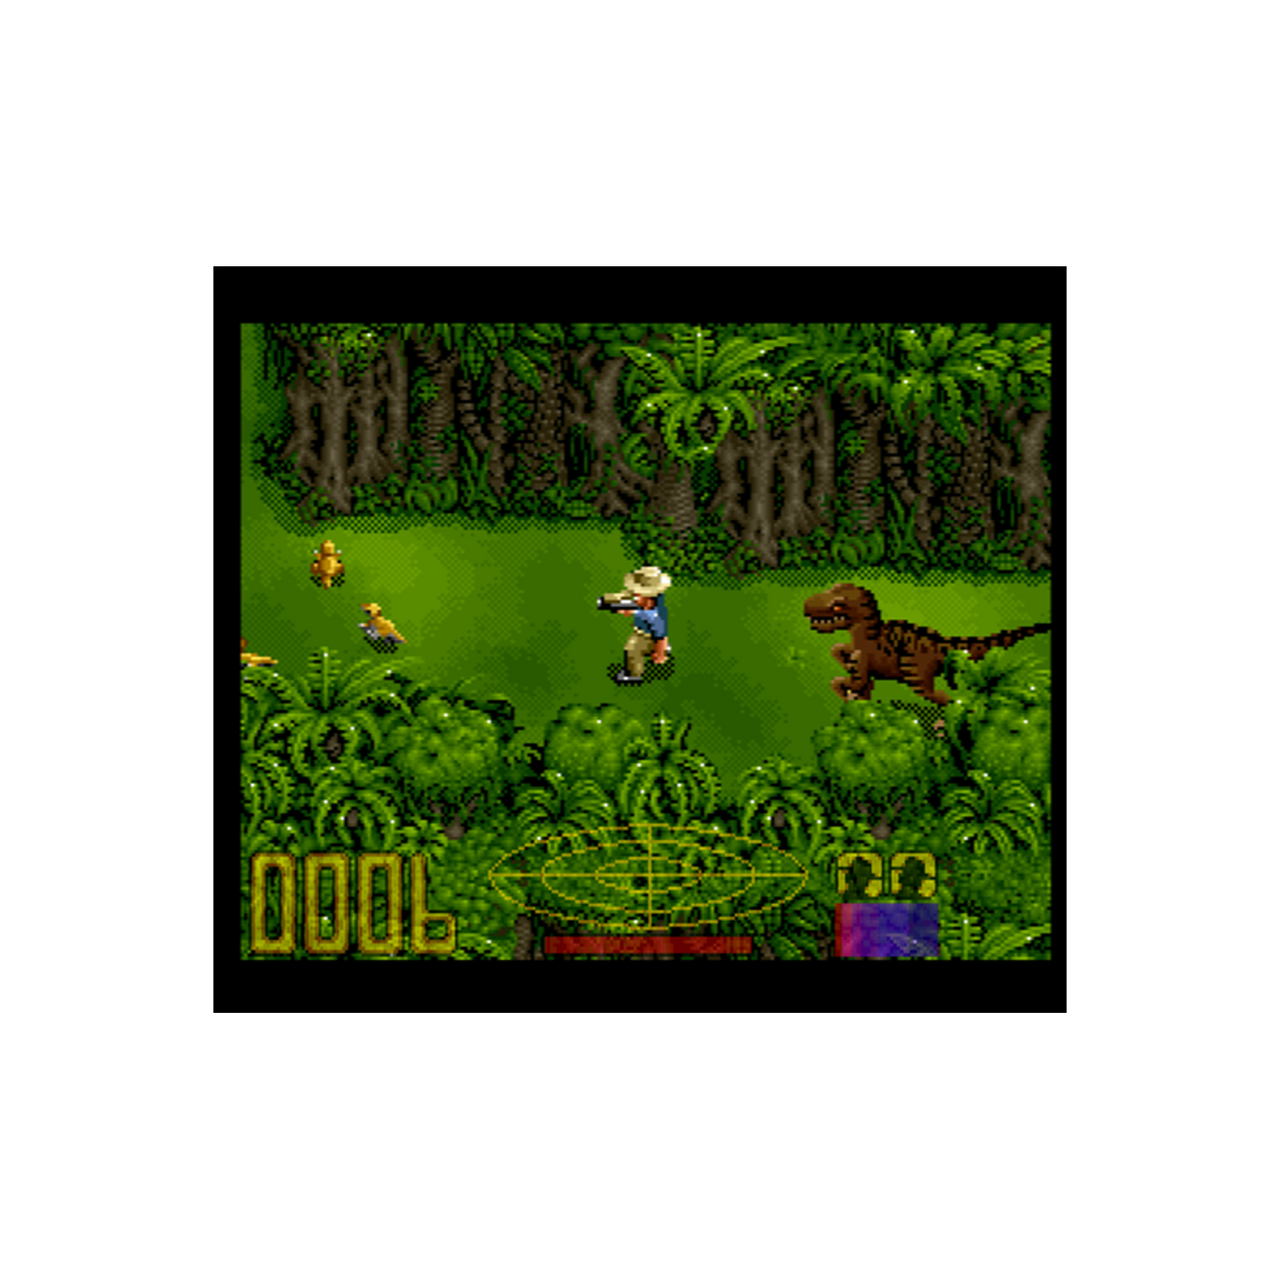 Product Image : This is brand new.<br>HOLD ON TO YOUR BUTTS! THE 8- AND 16-BIT ERA OF JURASSIC PARK GAMES HAS RETURNED, COMMEMORATING 30 YEARS OF THE ICONIC FILM!

This release includes a lineup of seven classic titles updated to include save state support, new in-game maps, and various quality-of-life fixes.

Jurassic Park 8-BIT
Jurassic Park PORTABLE
Jurassic Park 16-BIT
Jurassic Park GENESIS
Jurassic Park Part 2: The Chaos Continues 16-BIT
Jurassic Park Part 2: The Chaos Continues PORTABLE
Jurassic P